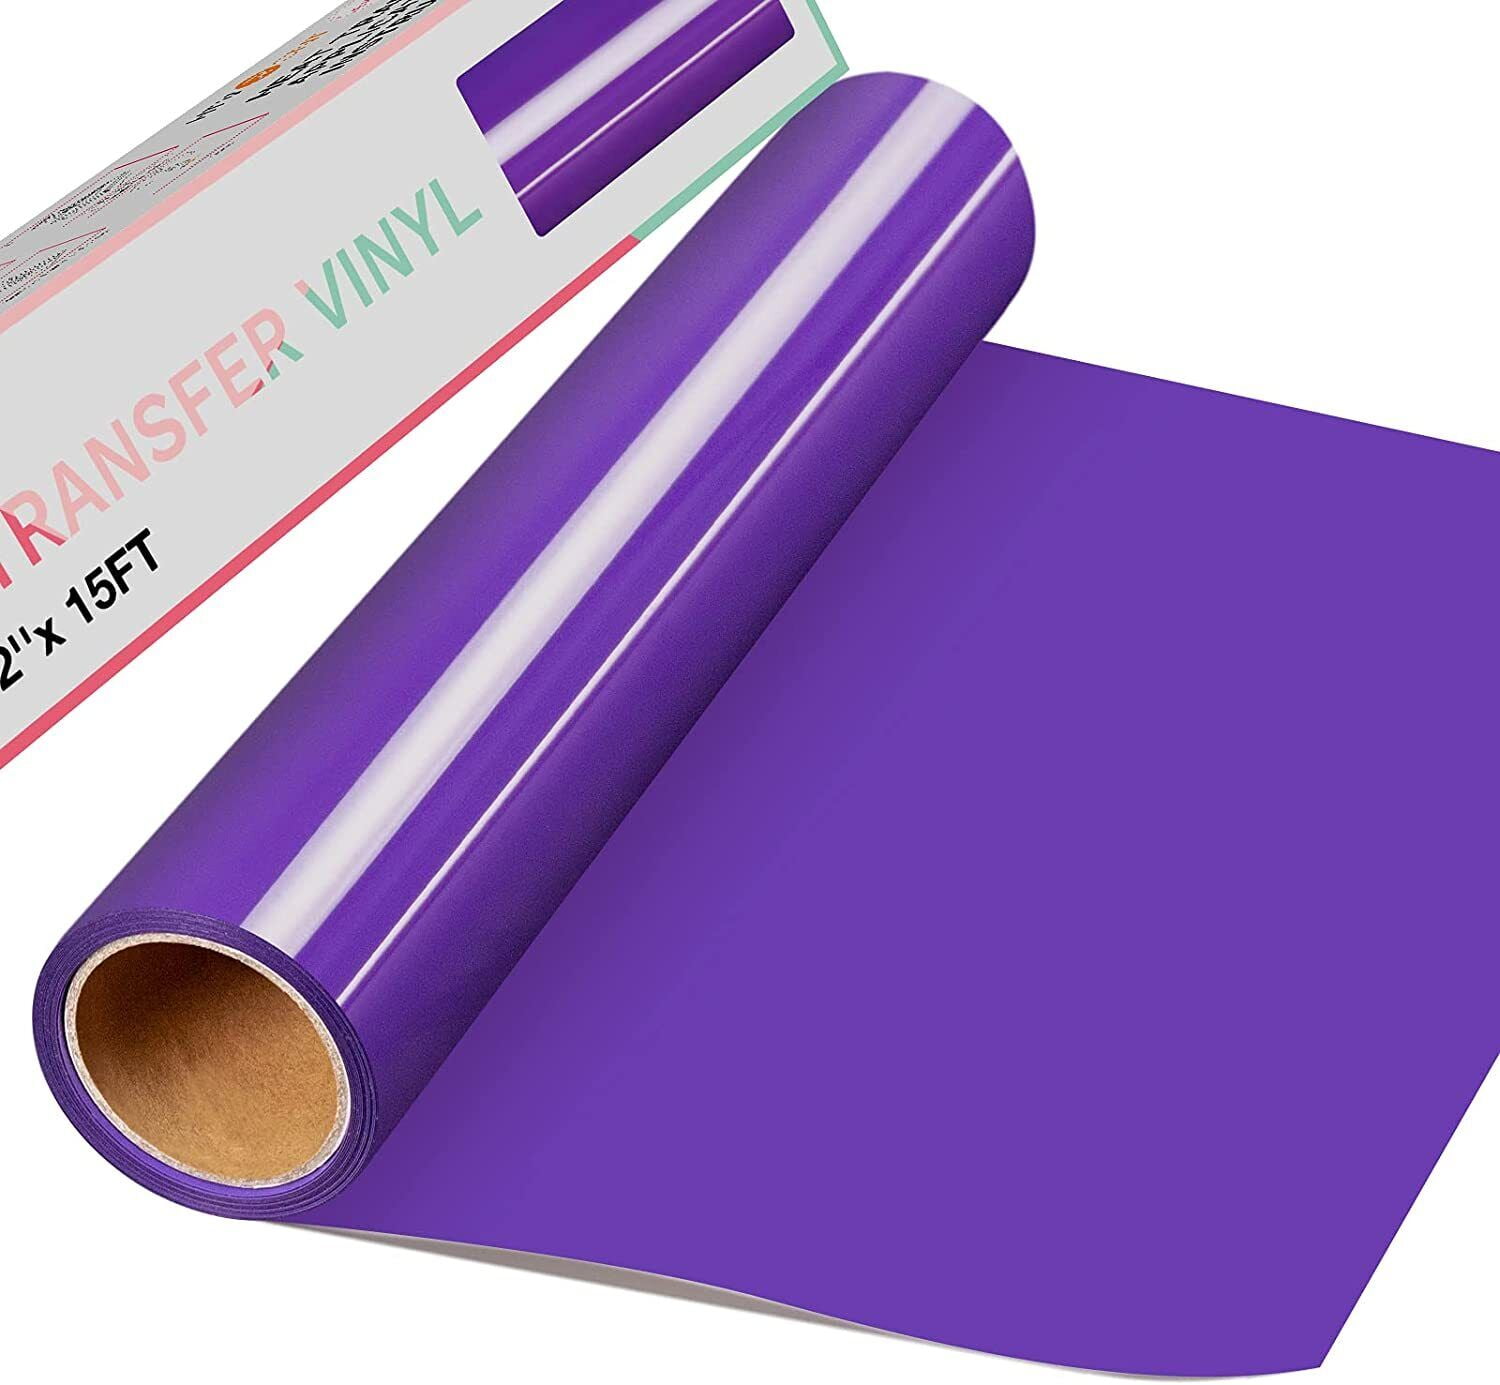 HTVRONT 54 Sheets 12 x 10 HTV Heat Transfer Vinyl Bundles Iron on for  T-Shirts, Clothing and Textiles, Easy Transfers, Includes HTV Accessories